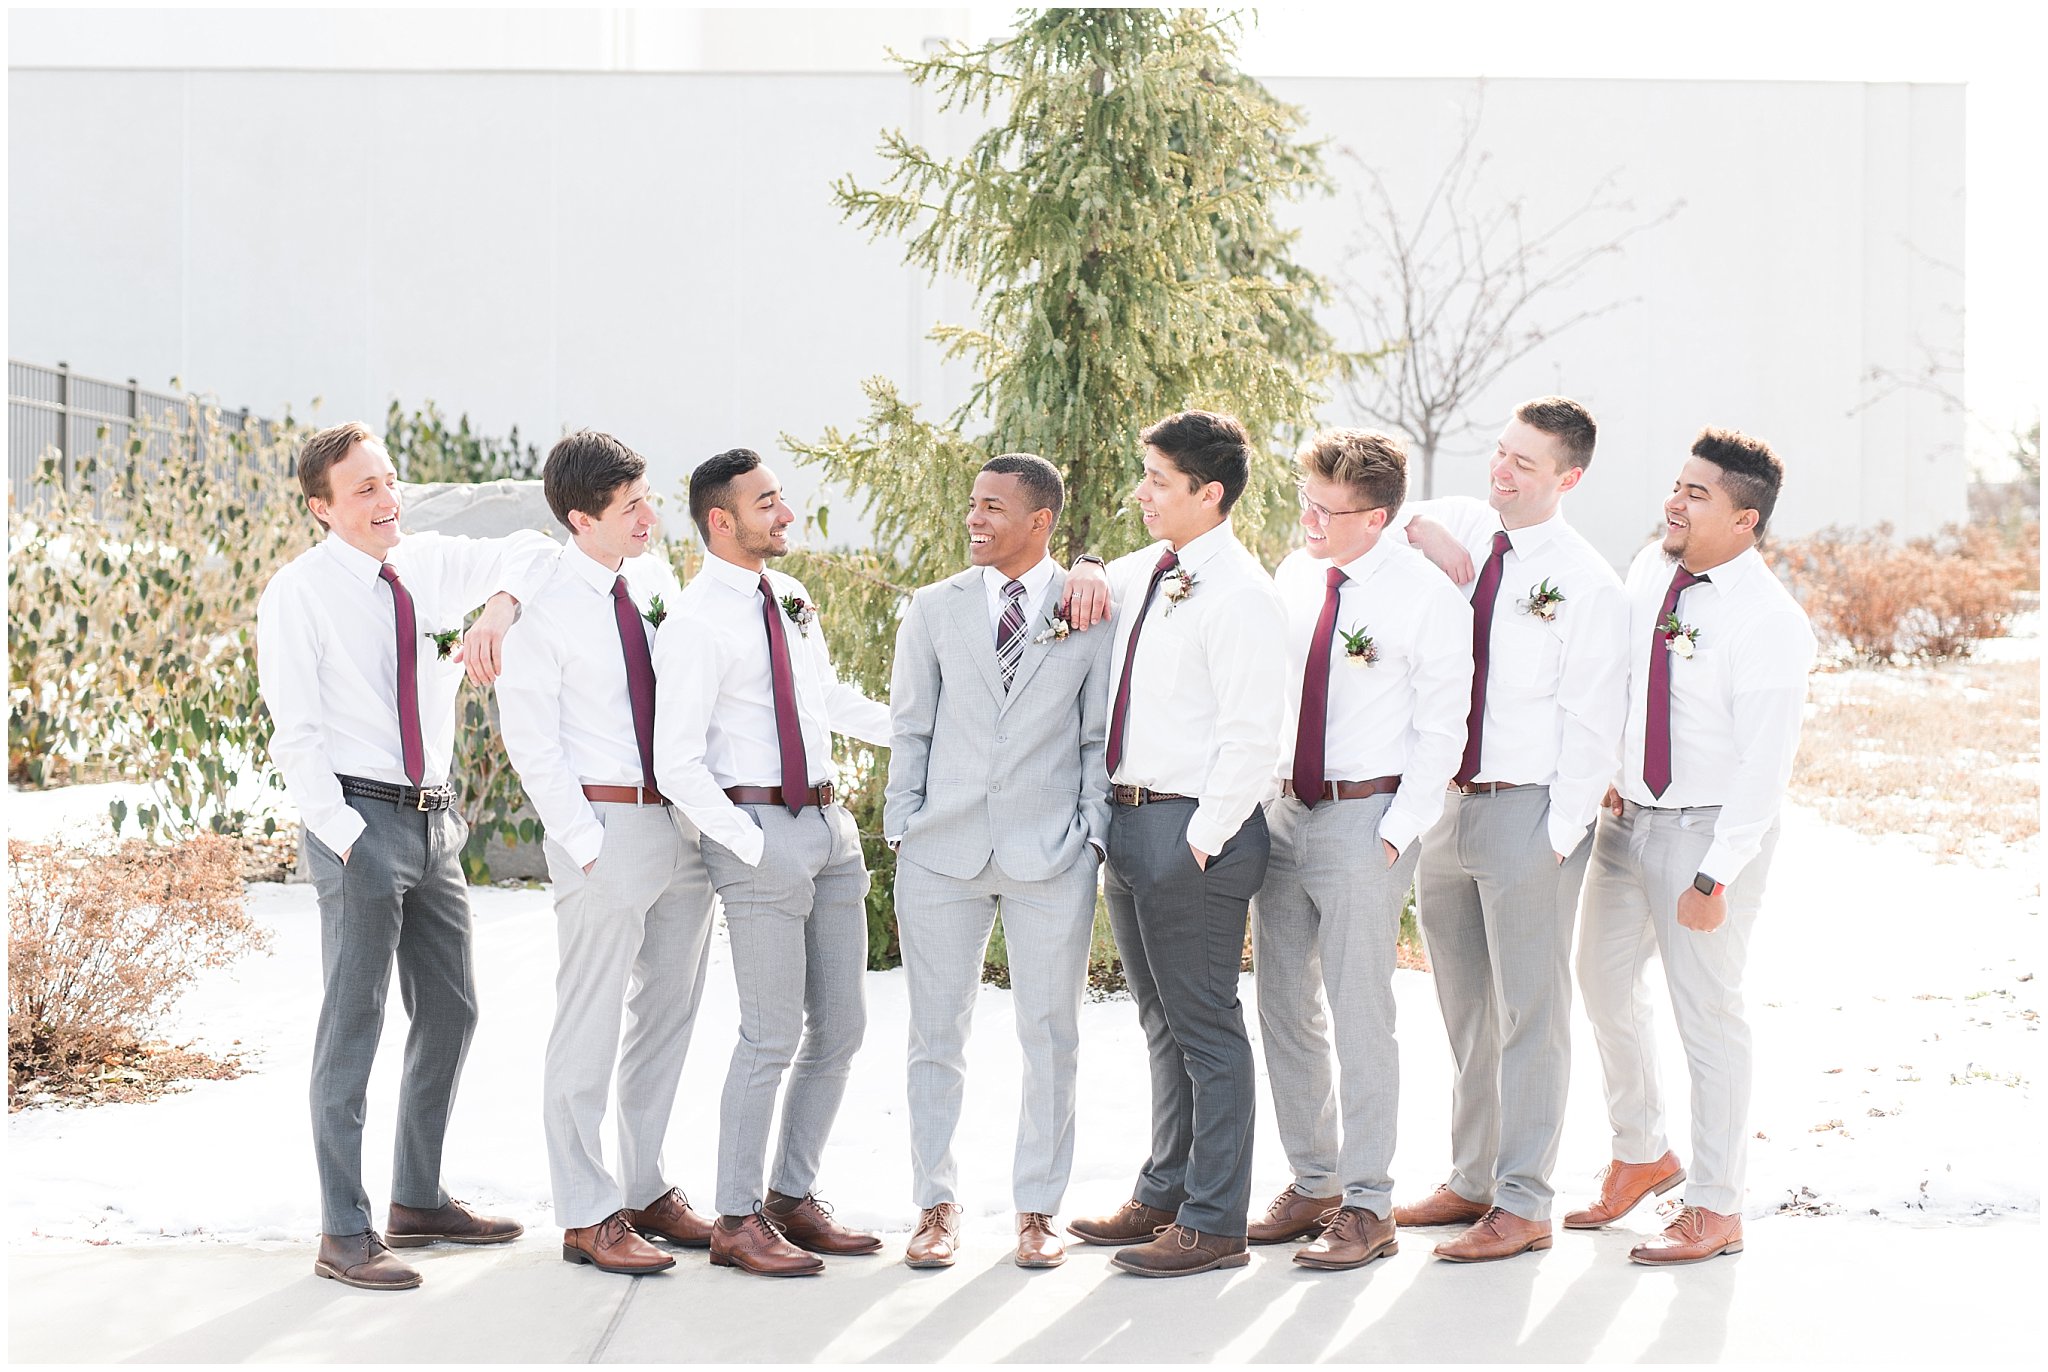 Bridal party photos in navy maxi dresses and burgundy ties at the Jordan River Temple | Burgundy and dusty rose bouquets | Jordan River Temple Winter Wedding | Jessie and Dallin Photography